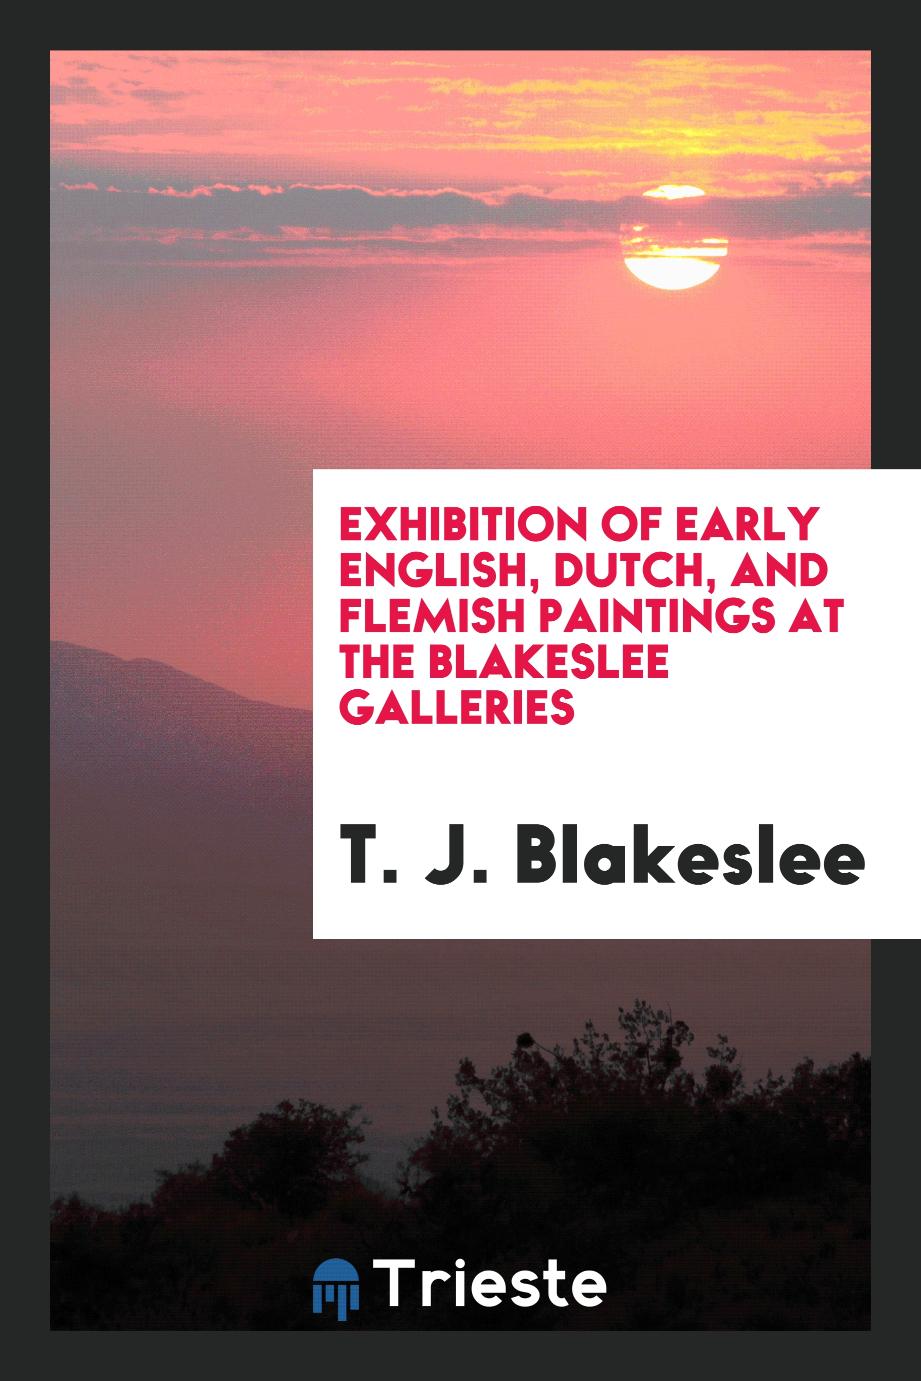 Exhibition of early English, Dutch, and Flemish paintings at the Blakeslee Galleries